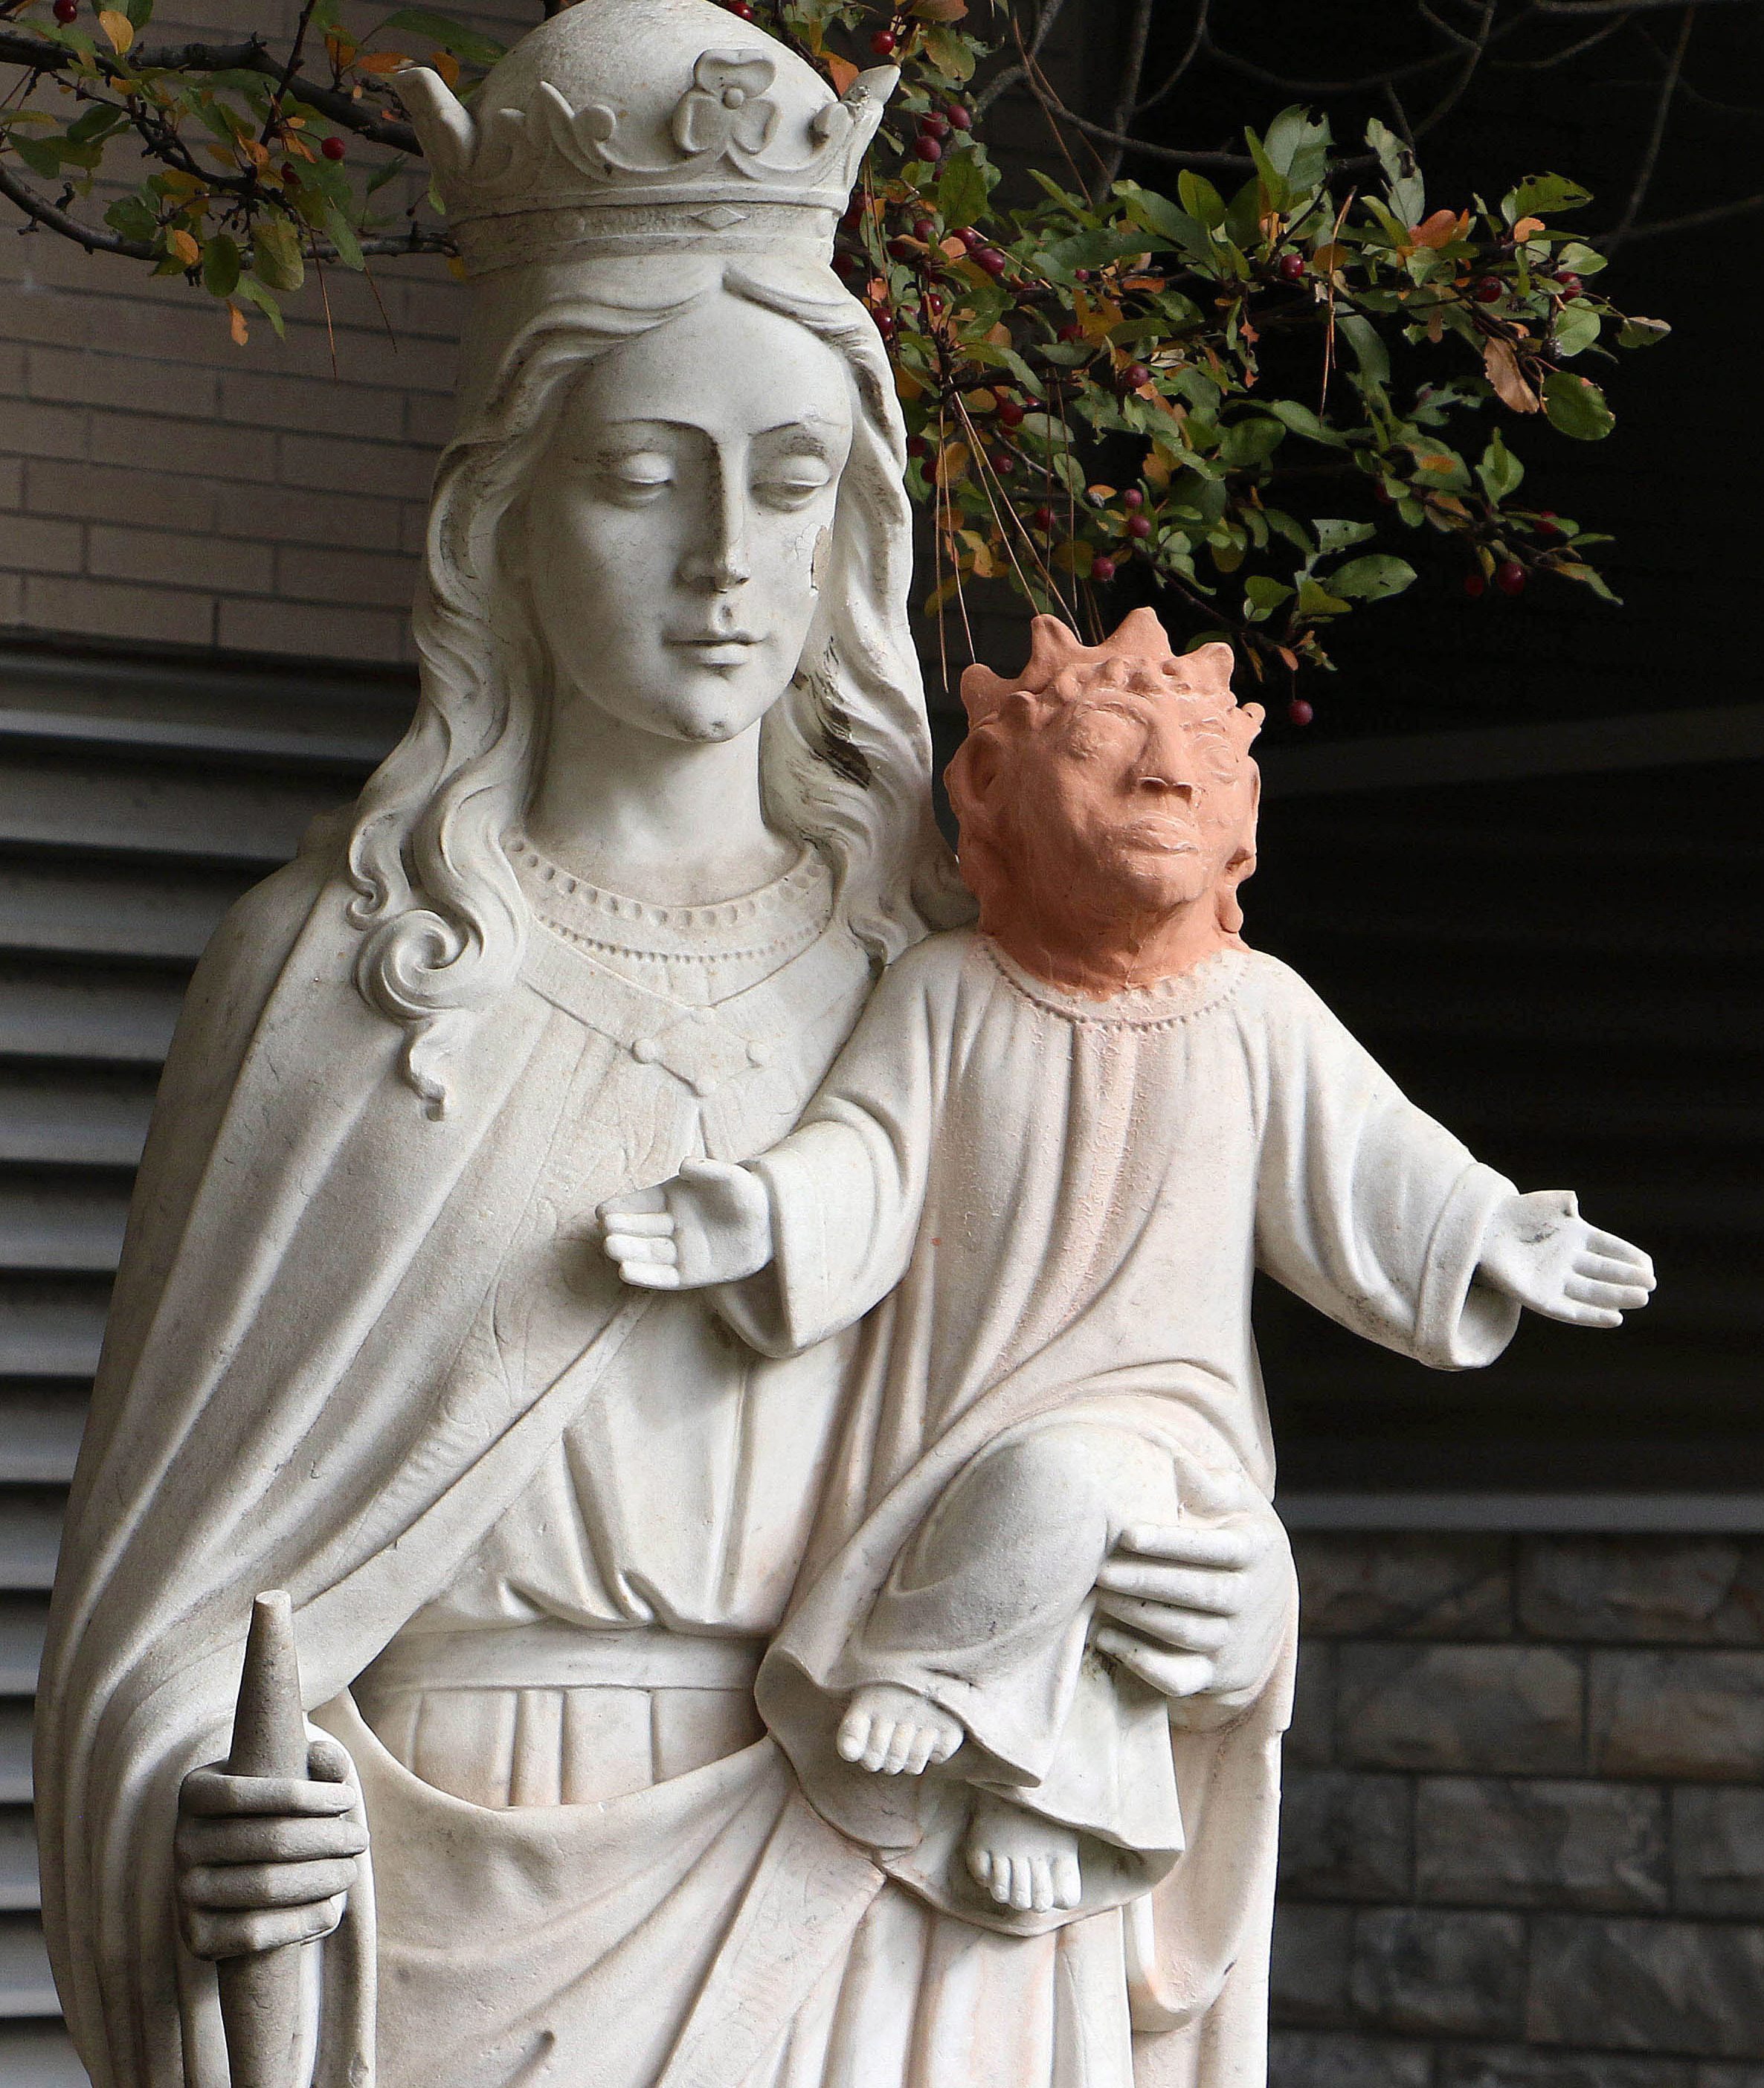 Canada: Baby Jesus Statue Restoriation Sparks Ridicule | Time